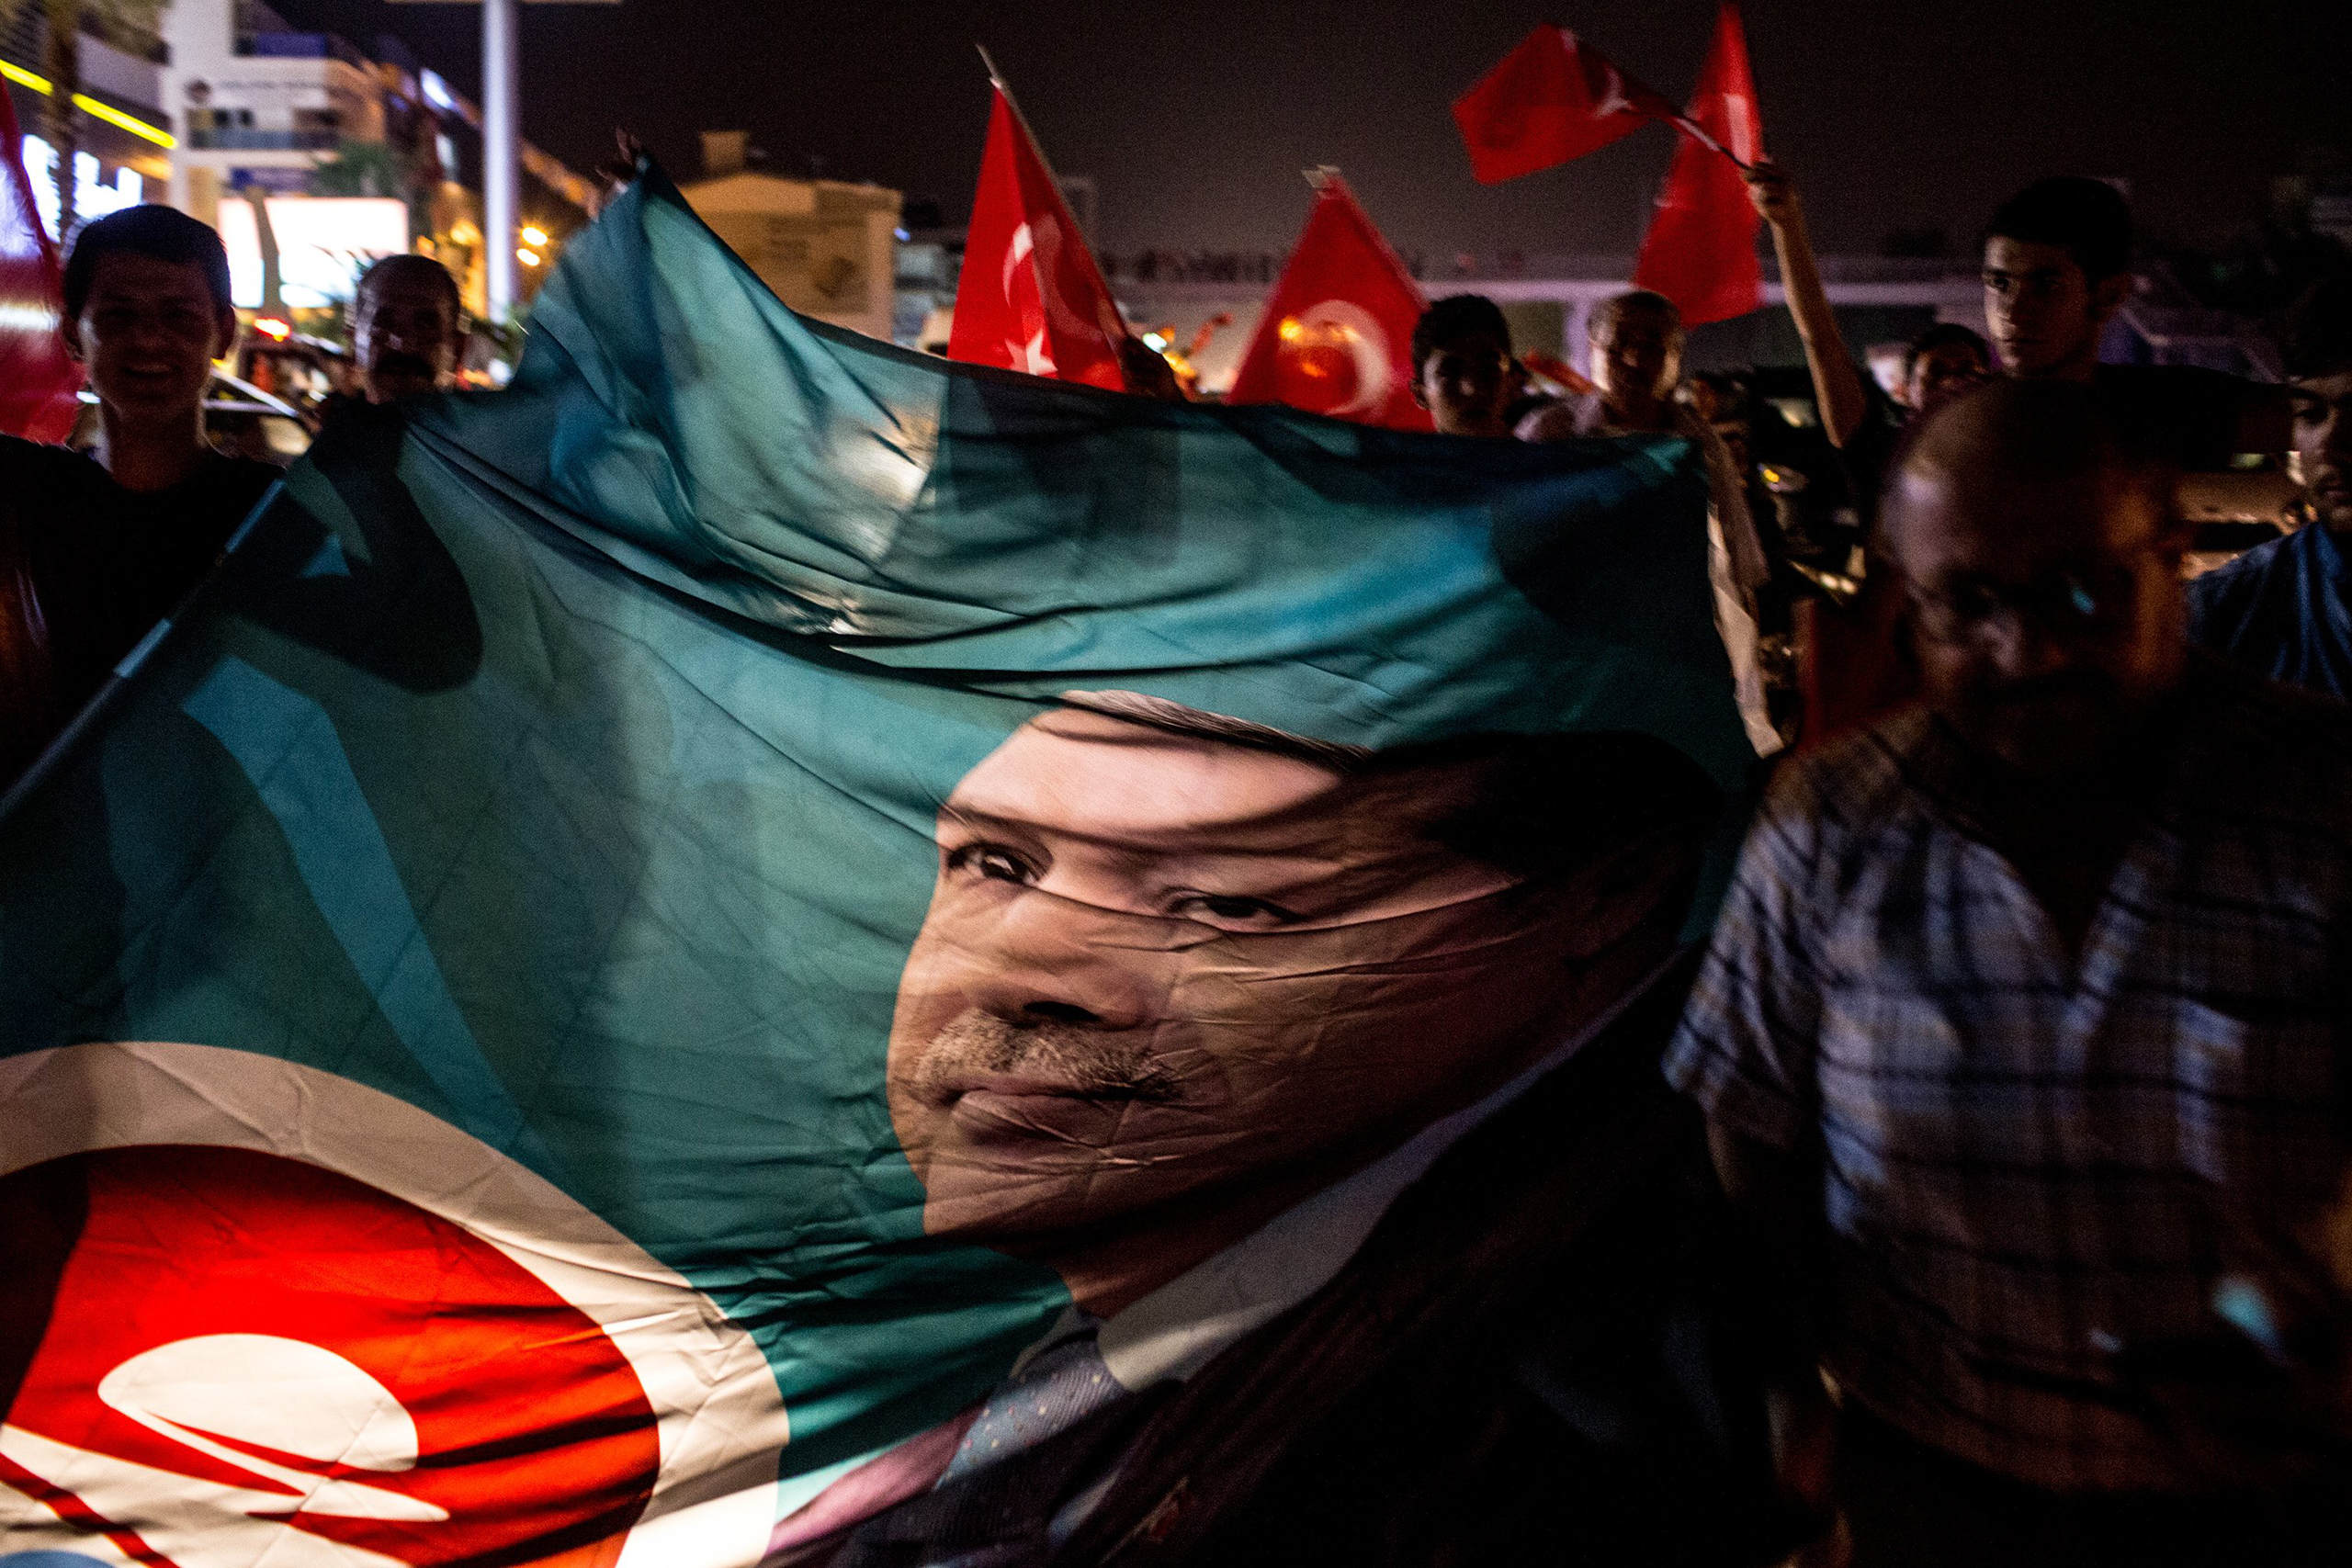 People take to the street in support of President Recep Tayyip Erdogan in Antalya, Turkey, on July 16, 2016.